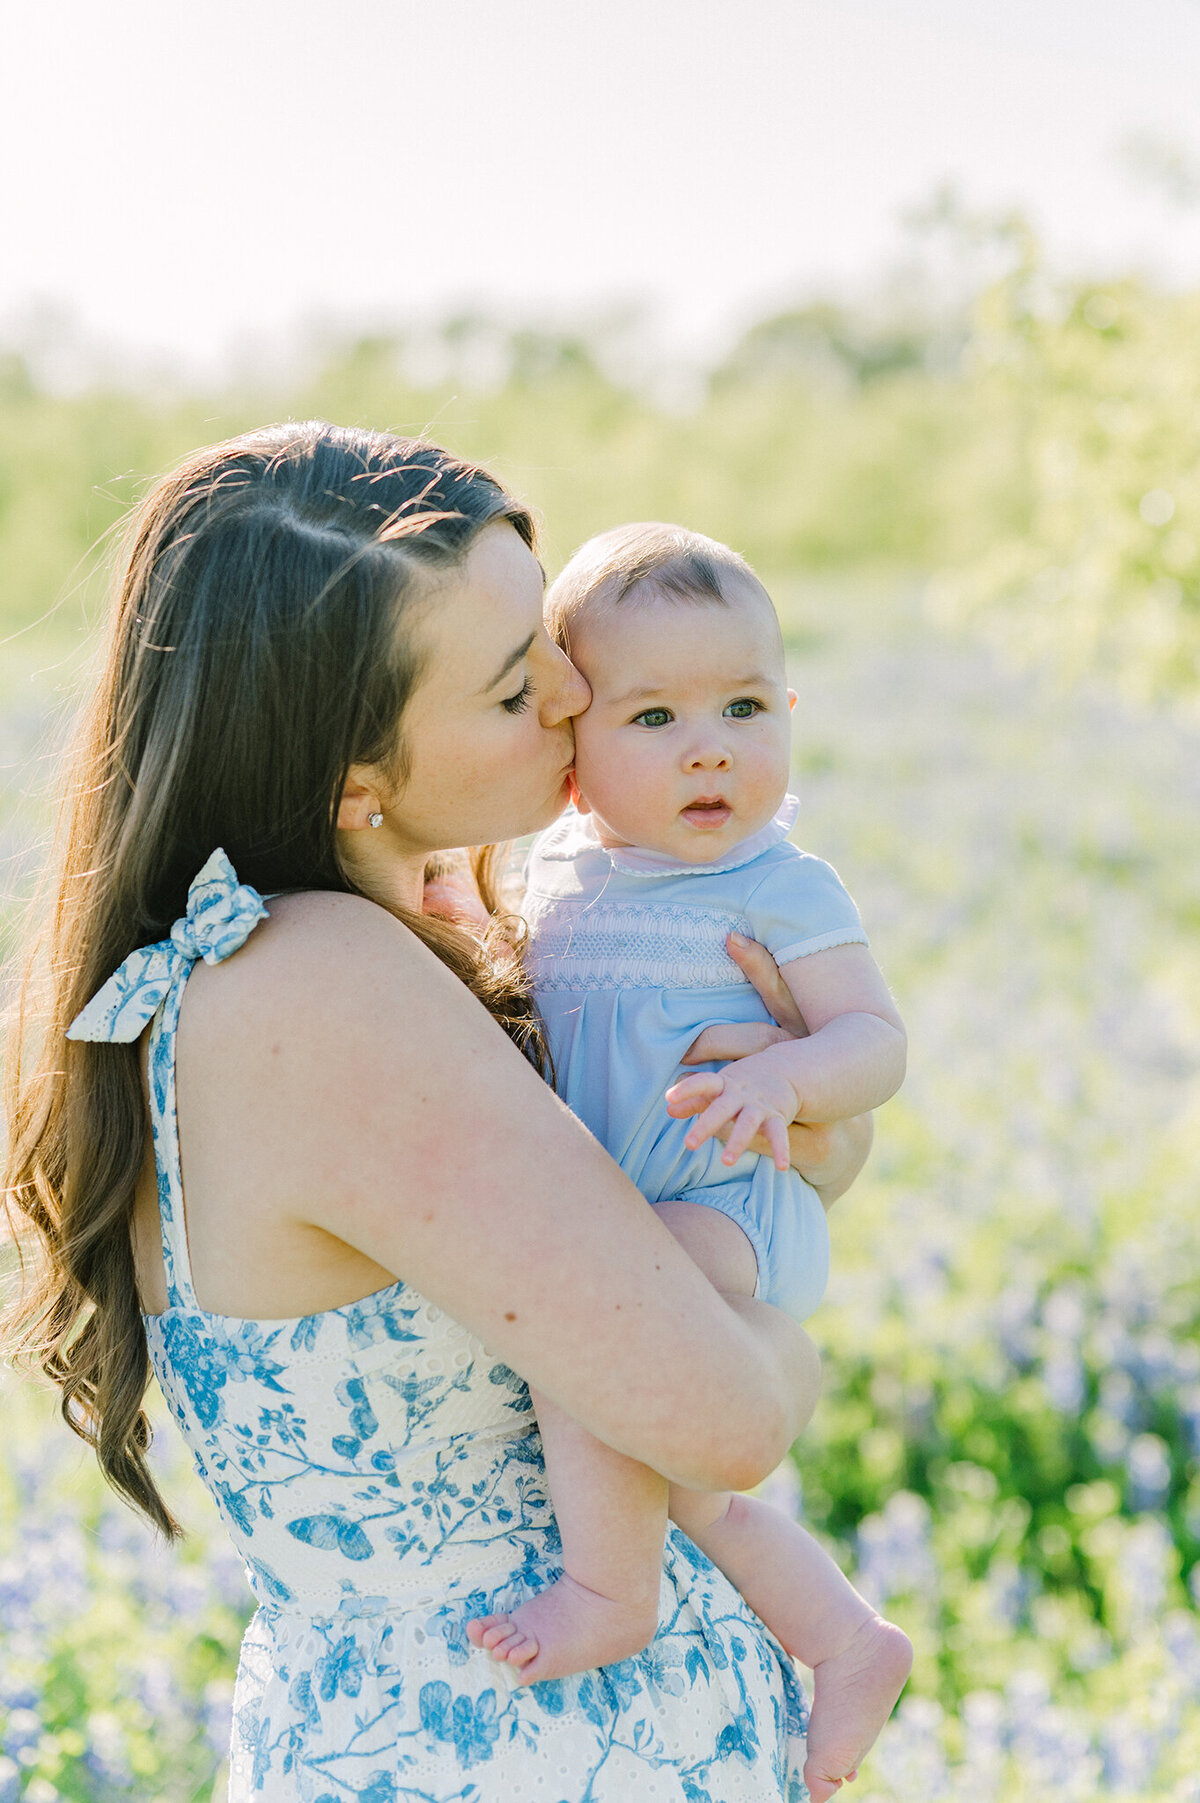 Mother kissing her baby son in a field of bluebonnets.